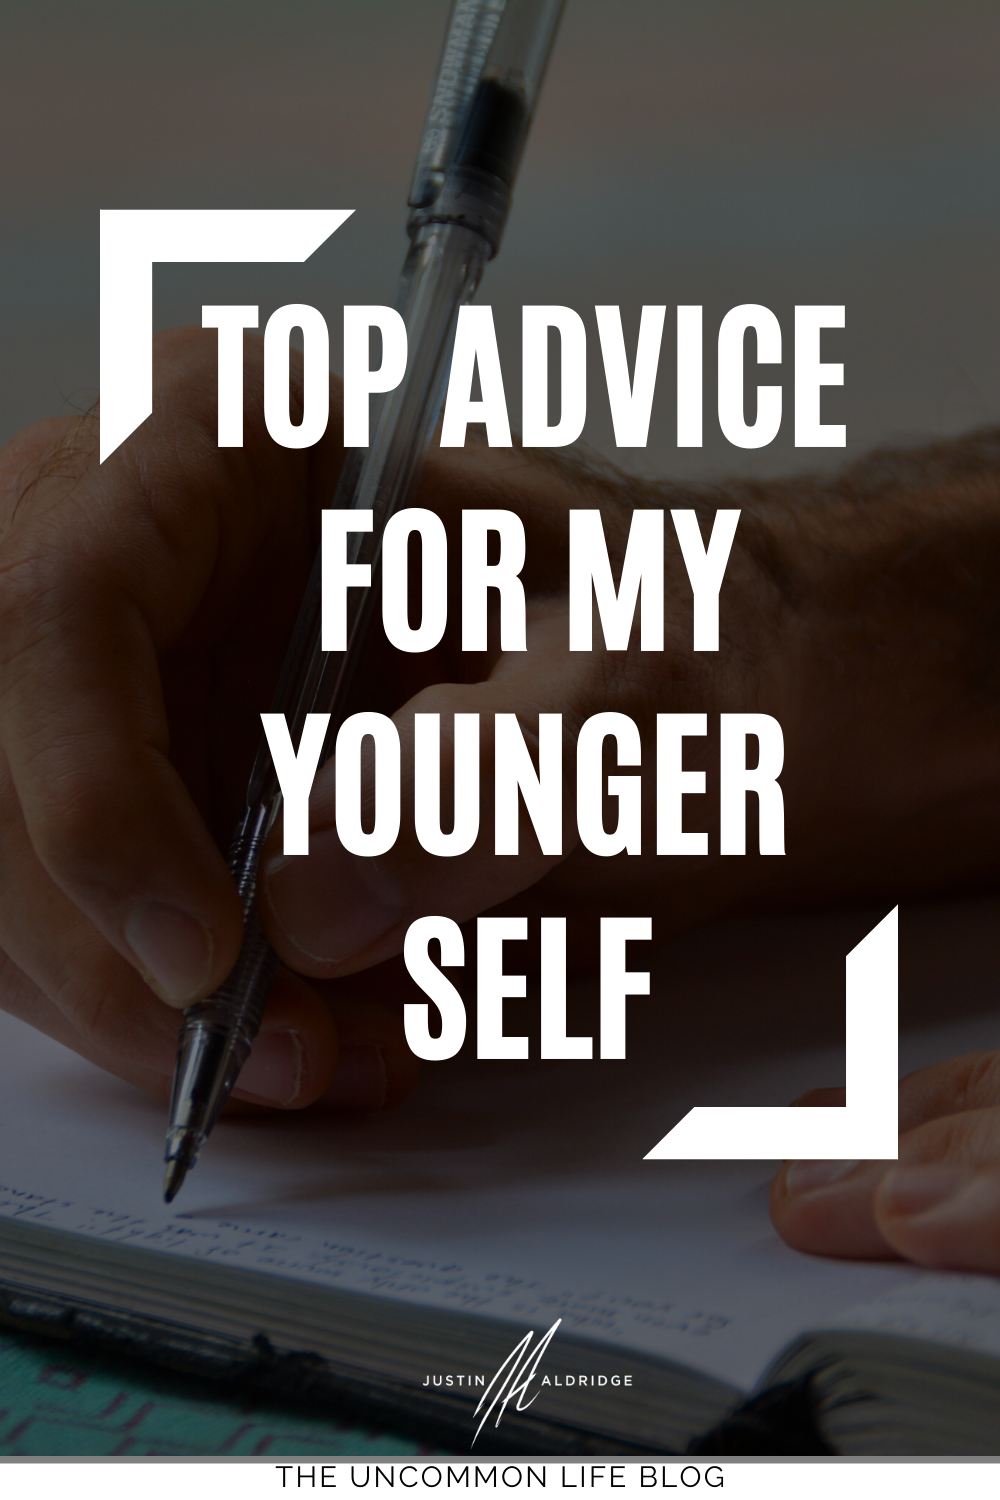 Man writing on a pad of paper in the background with "Top advice for my younger self" in white font in front